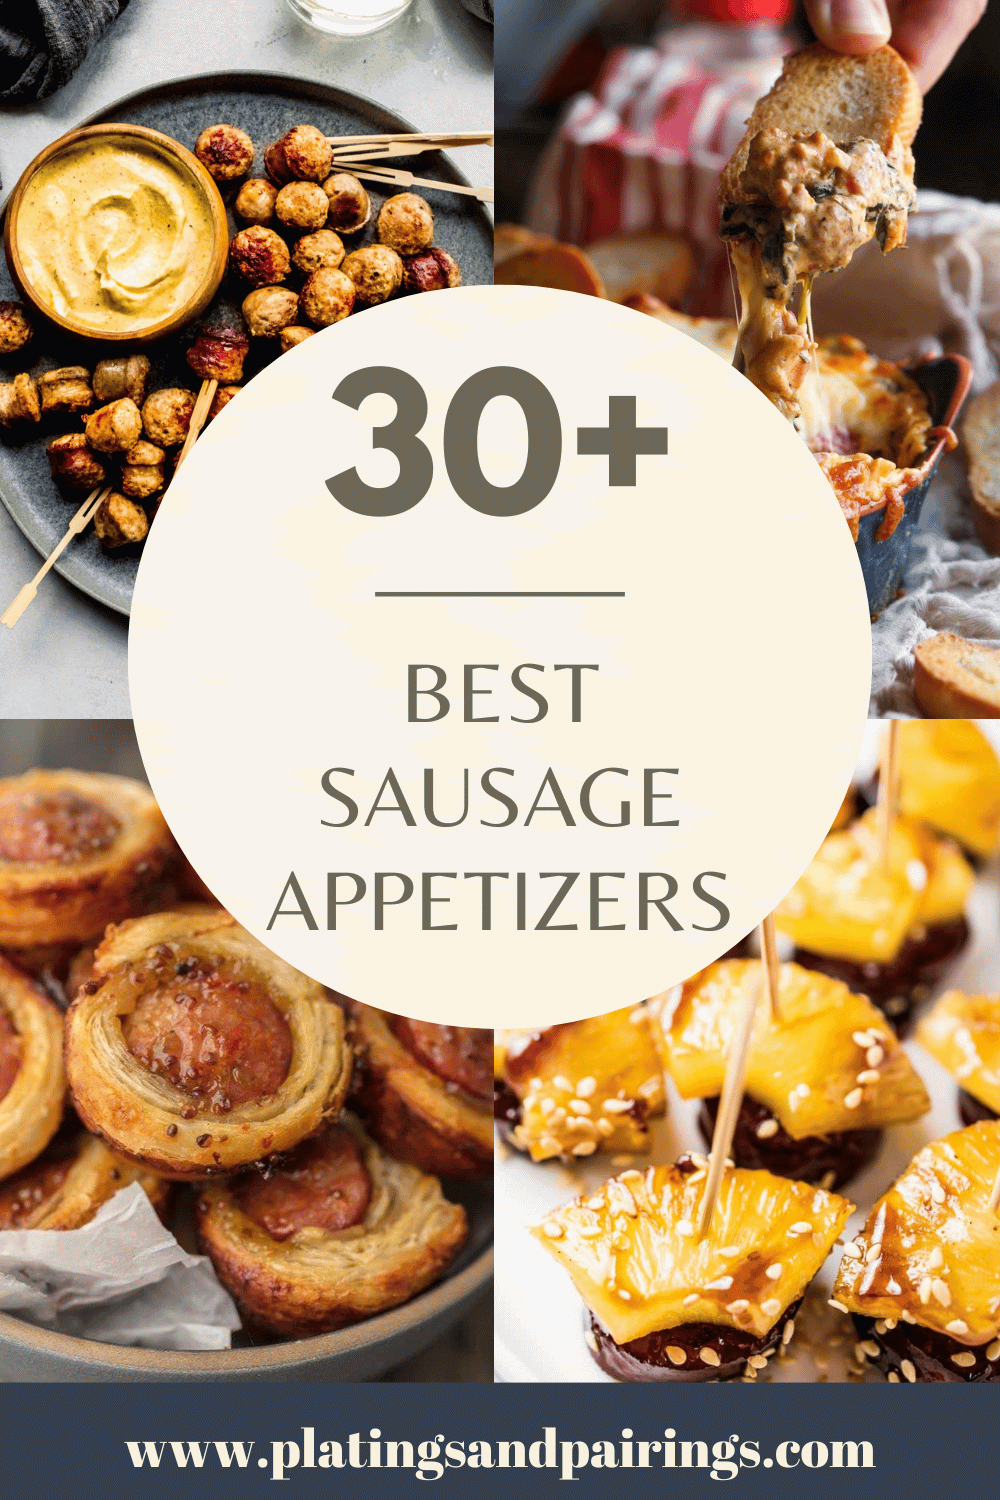 50 Easy Appetizers (+ Quick Recipes) - Insanely Good